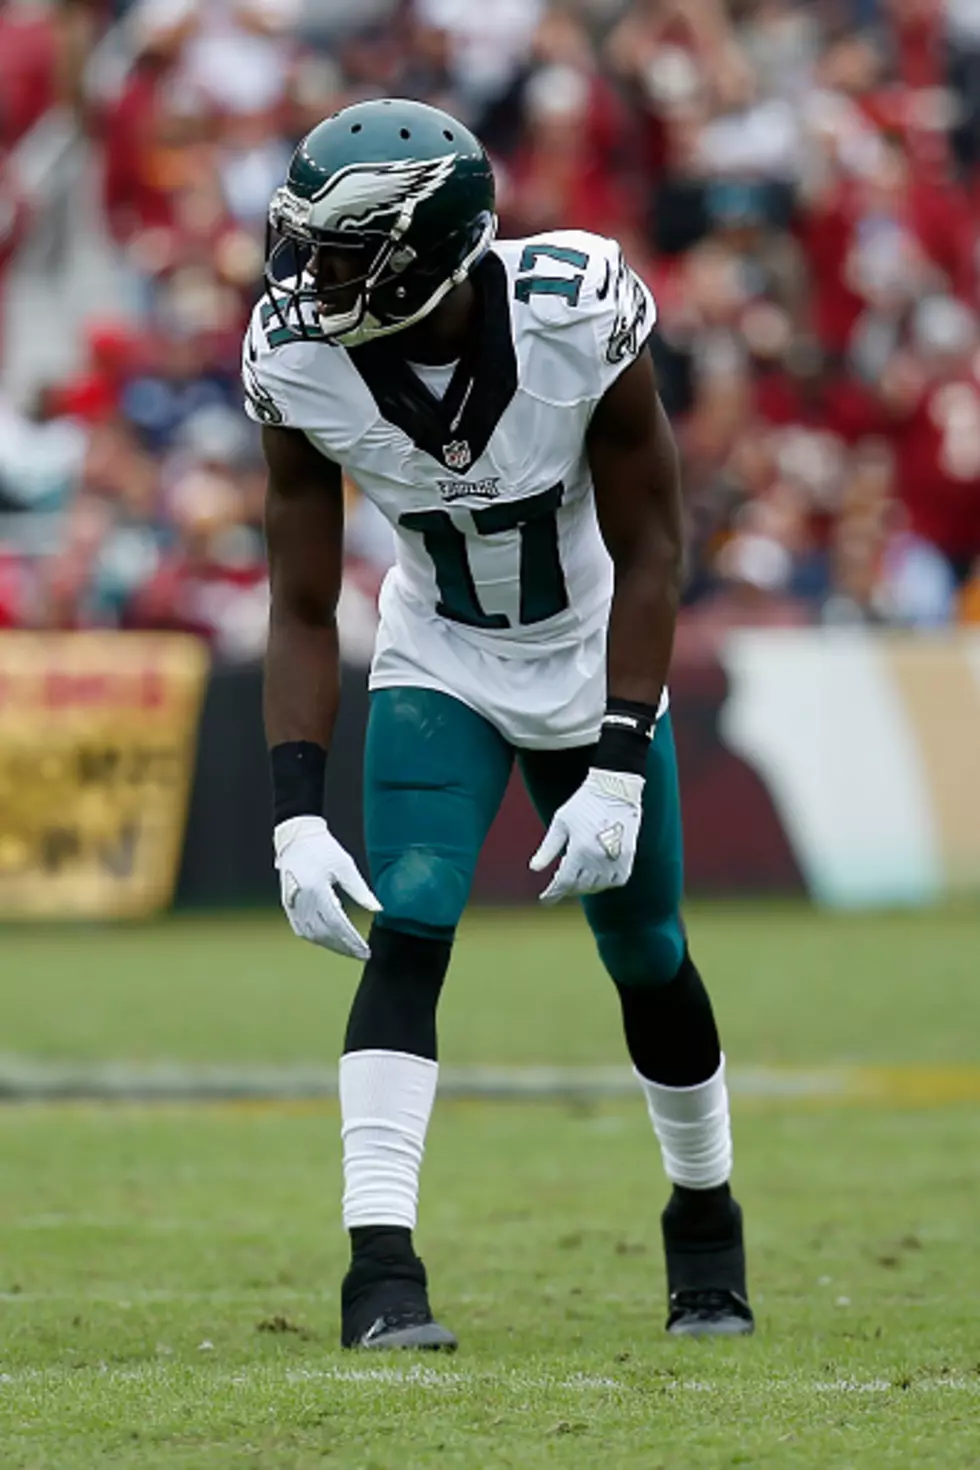 What Has Agholor Improved On Entering His 2nd Season?